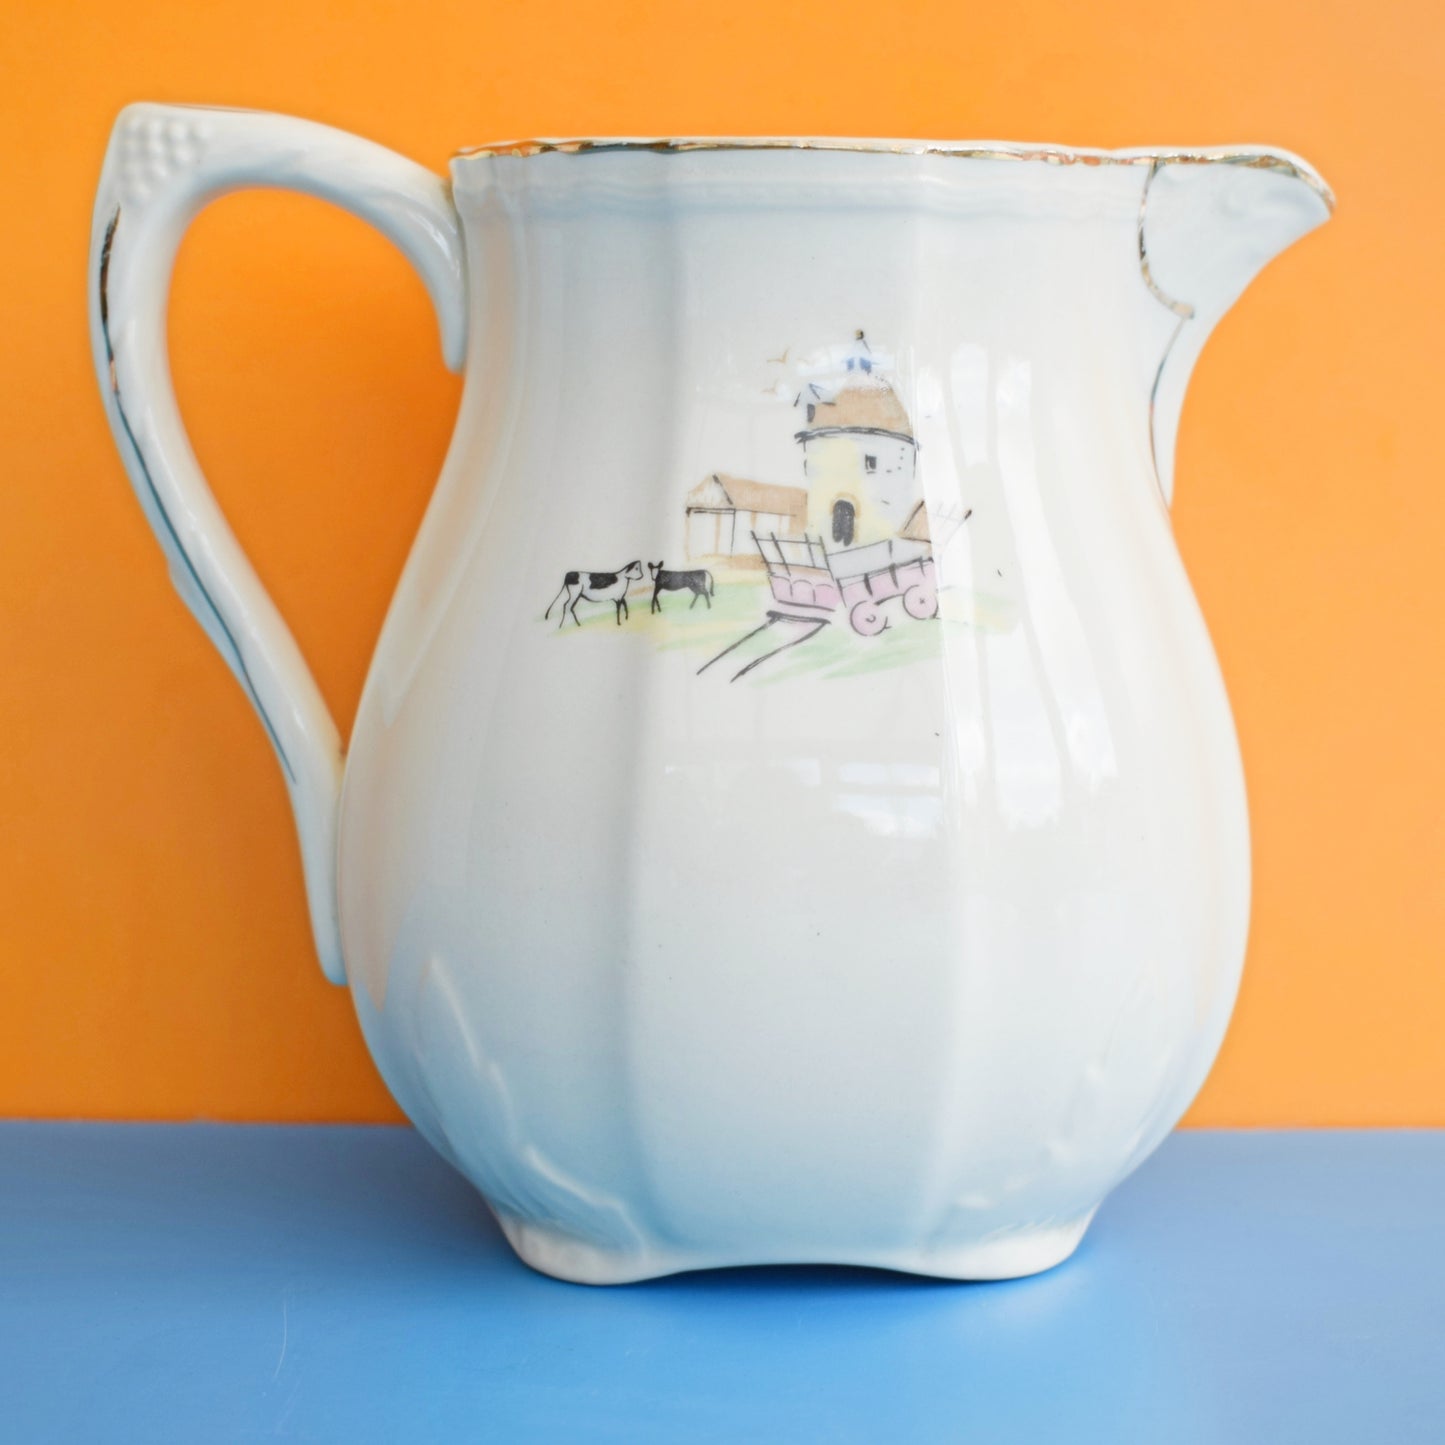 Vintage 1950s Alfred Meakin Jug - Down On The Farm